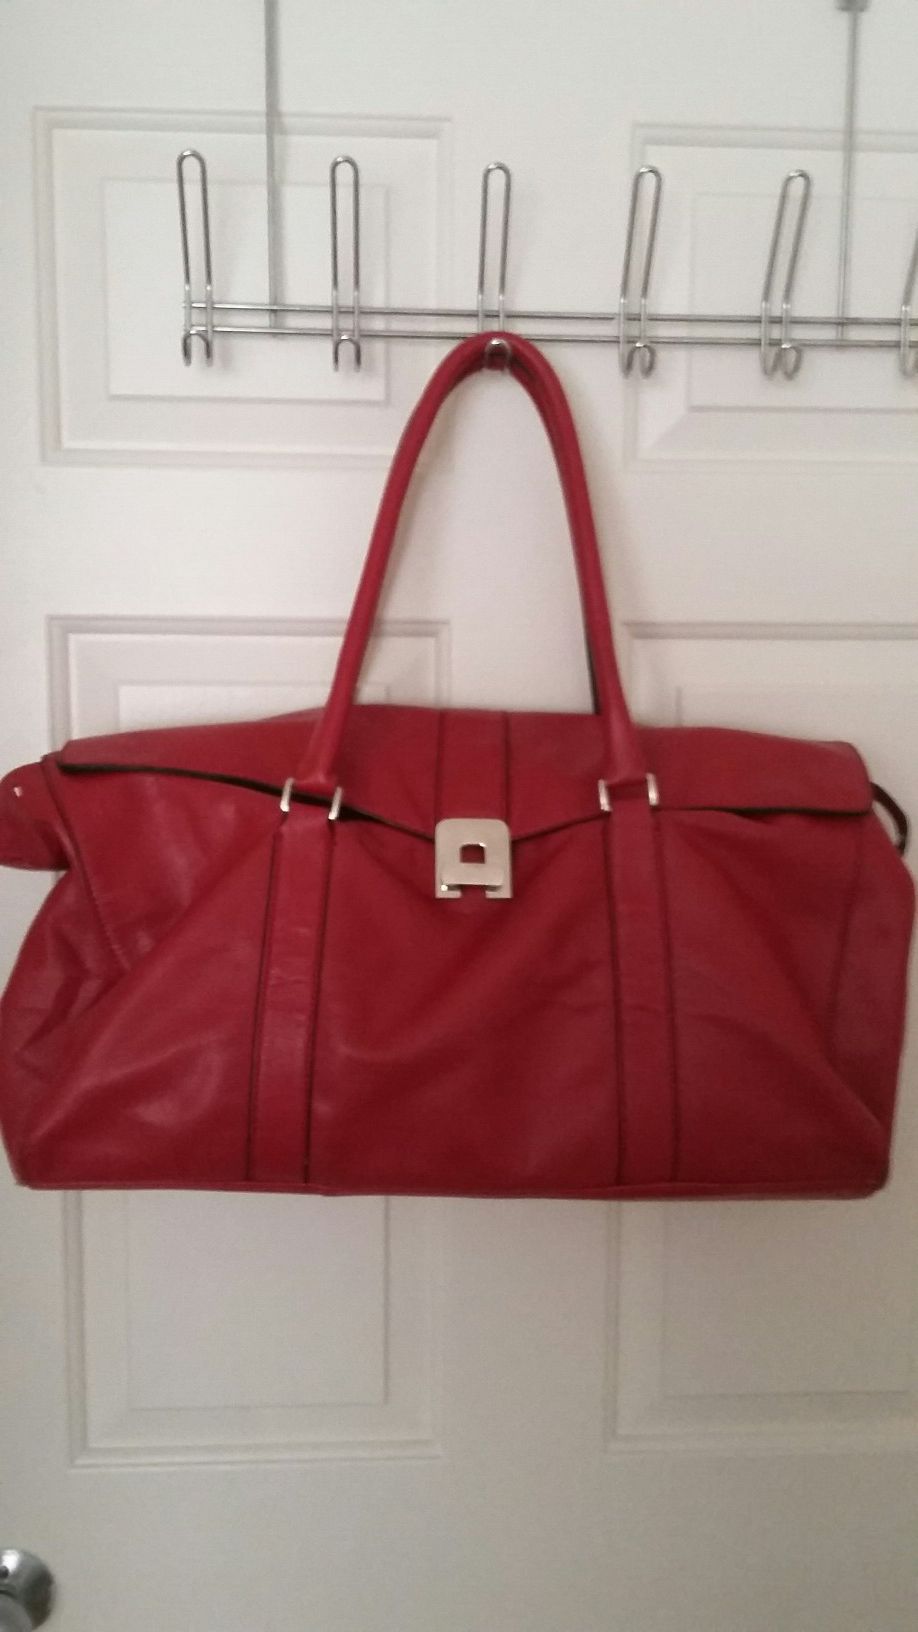 BEAUTIFUL REAL LEATHER TOTE BAG, RED LARGE Must see